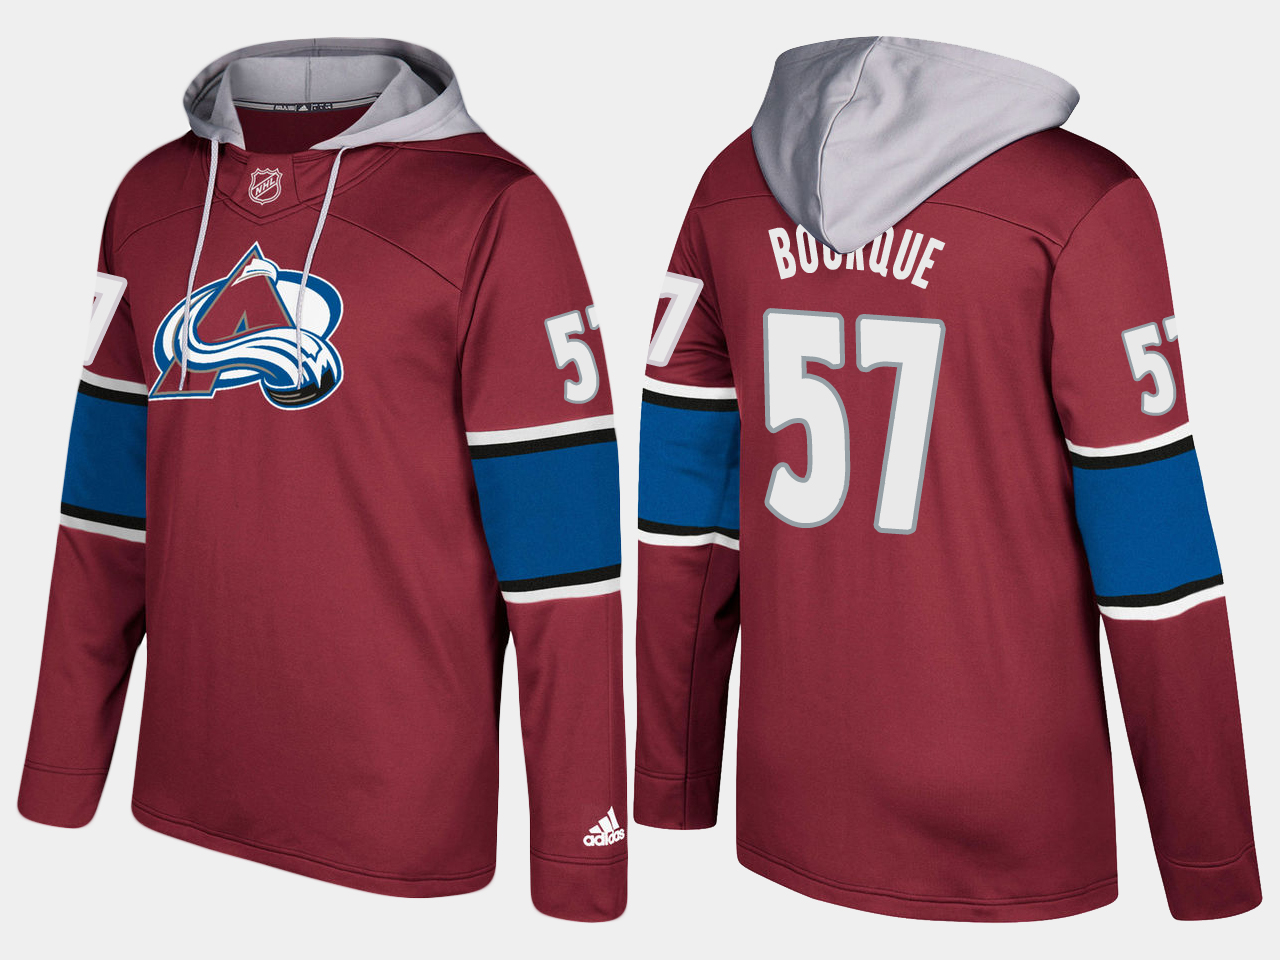 Nike Avalanche 57 Gabriel Bourque Name And Number Burgundy Hoodie